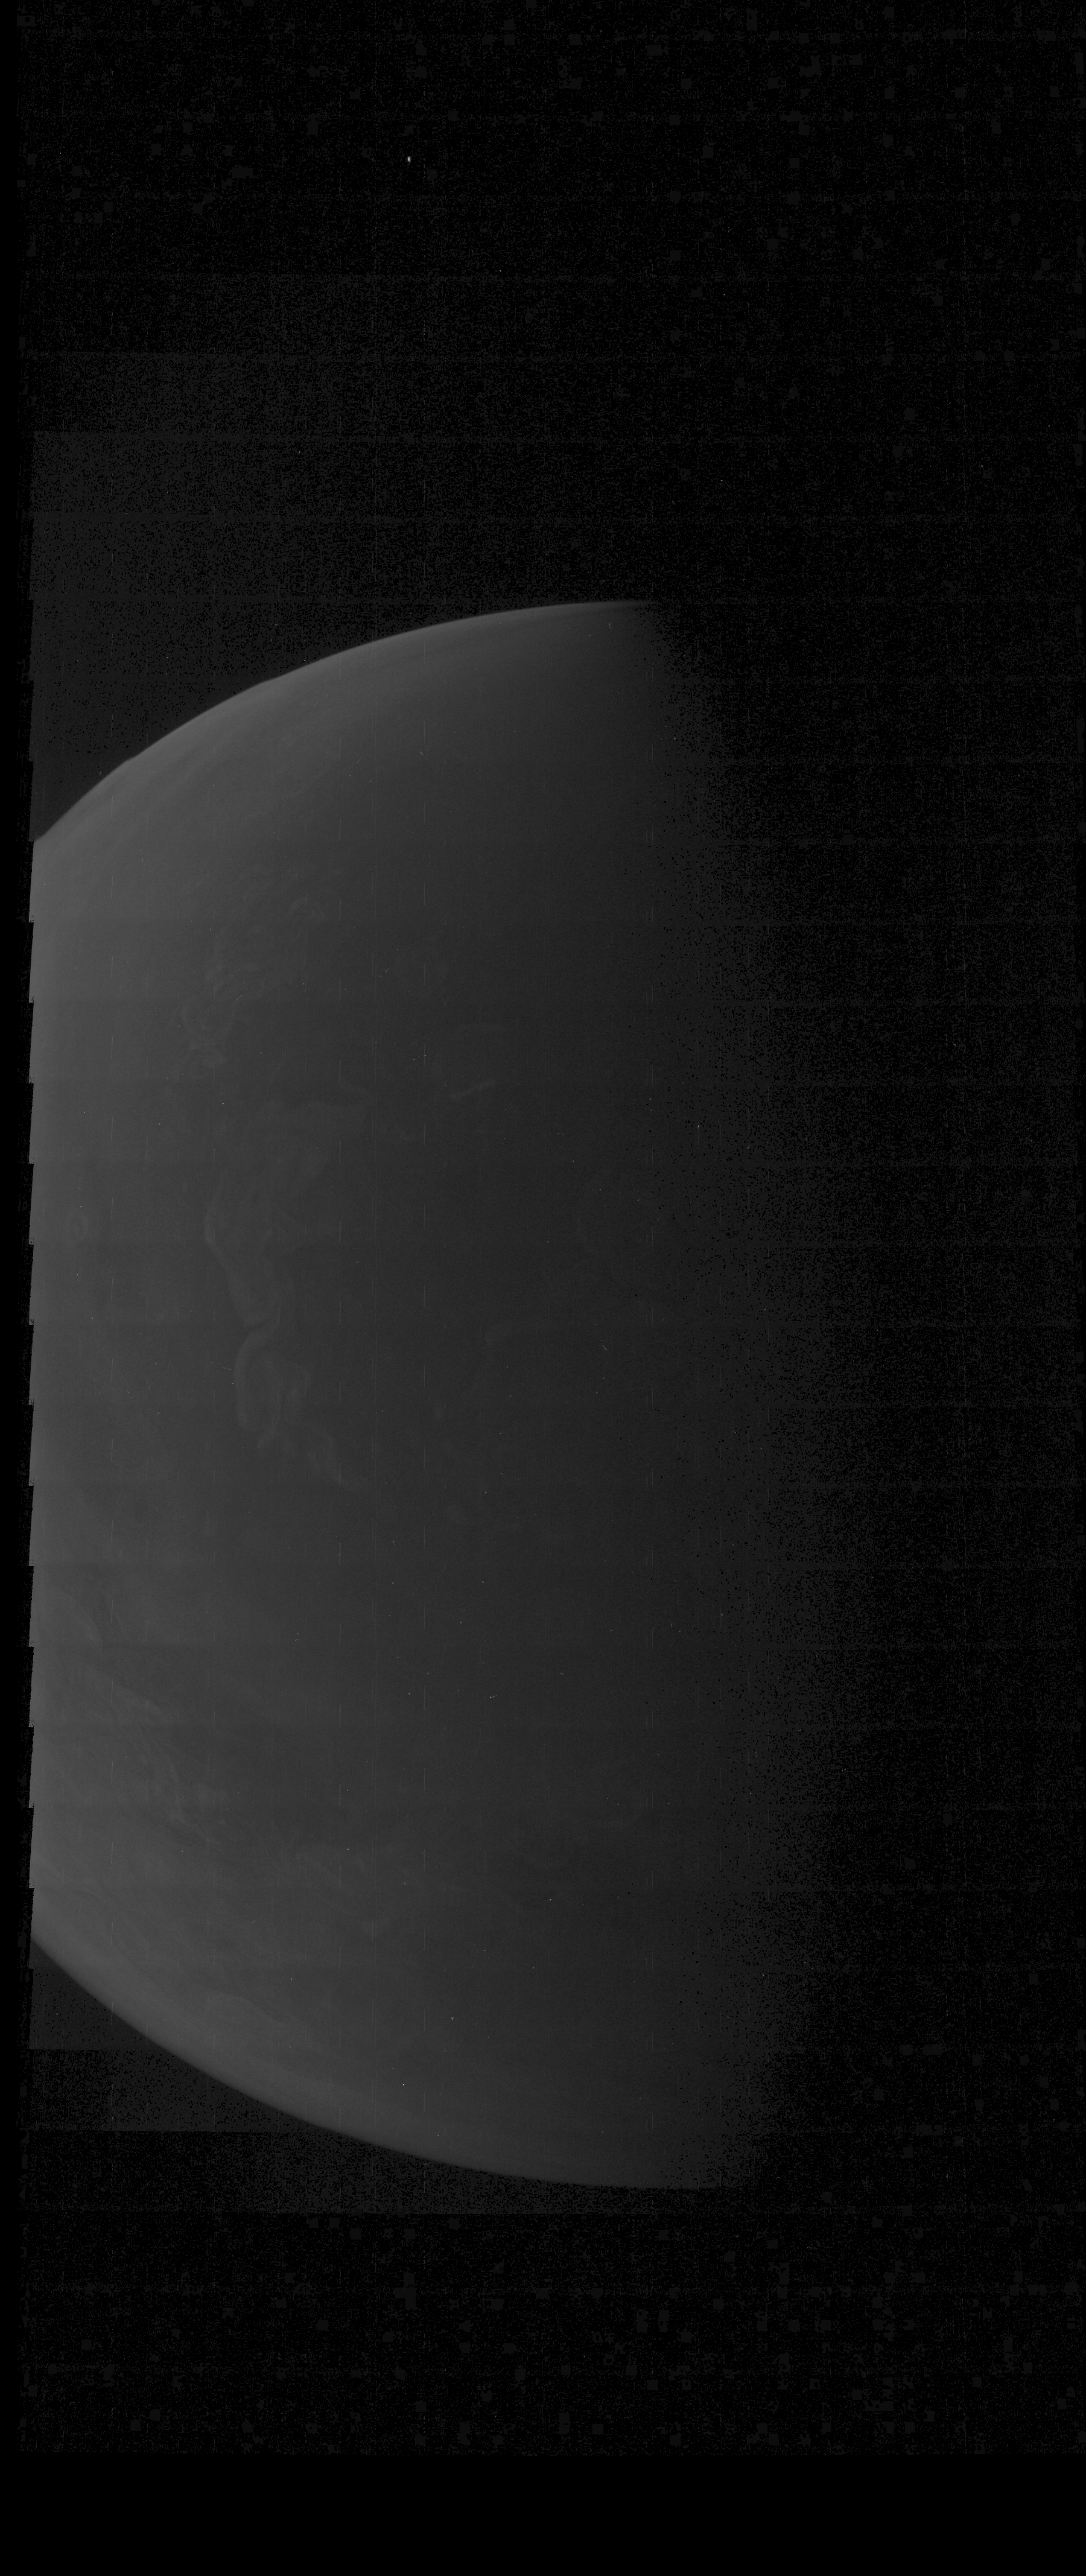 JNCE_2019360_24M00020_V01-raw_proc_hollow_sphere_m_pj_out.BMP_thumbnail_.png